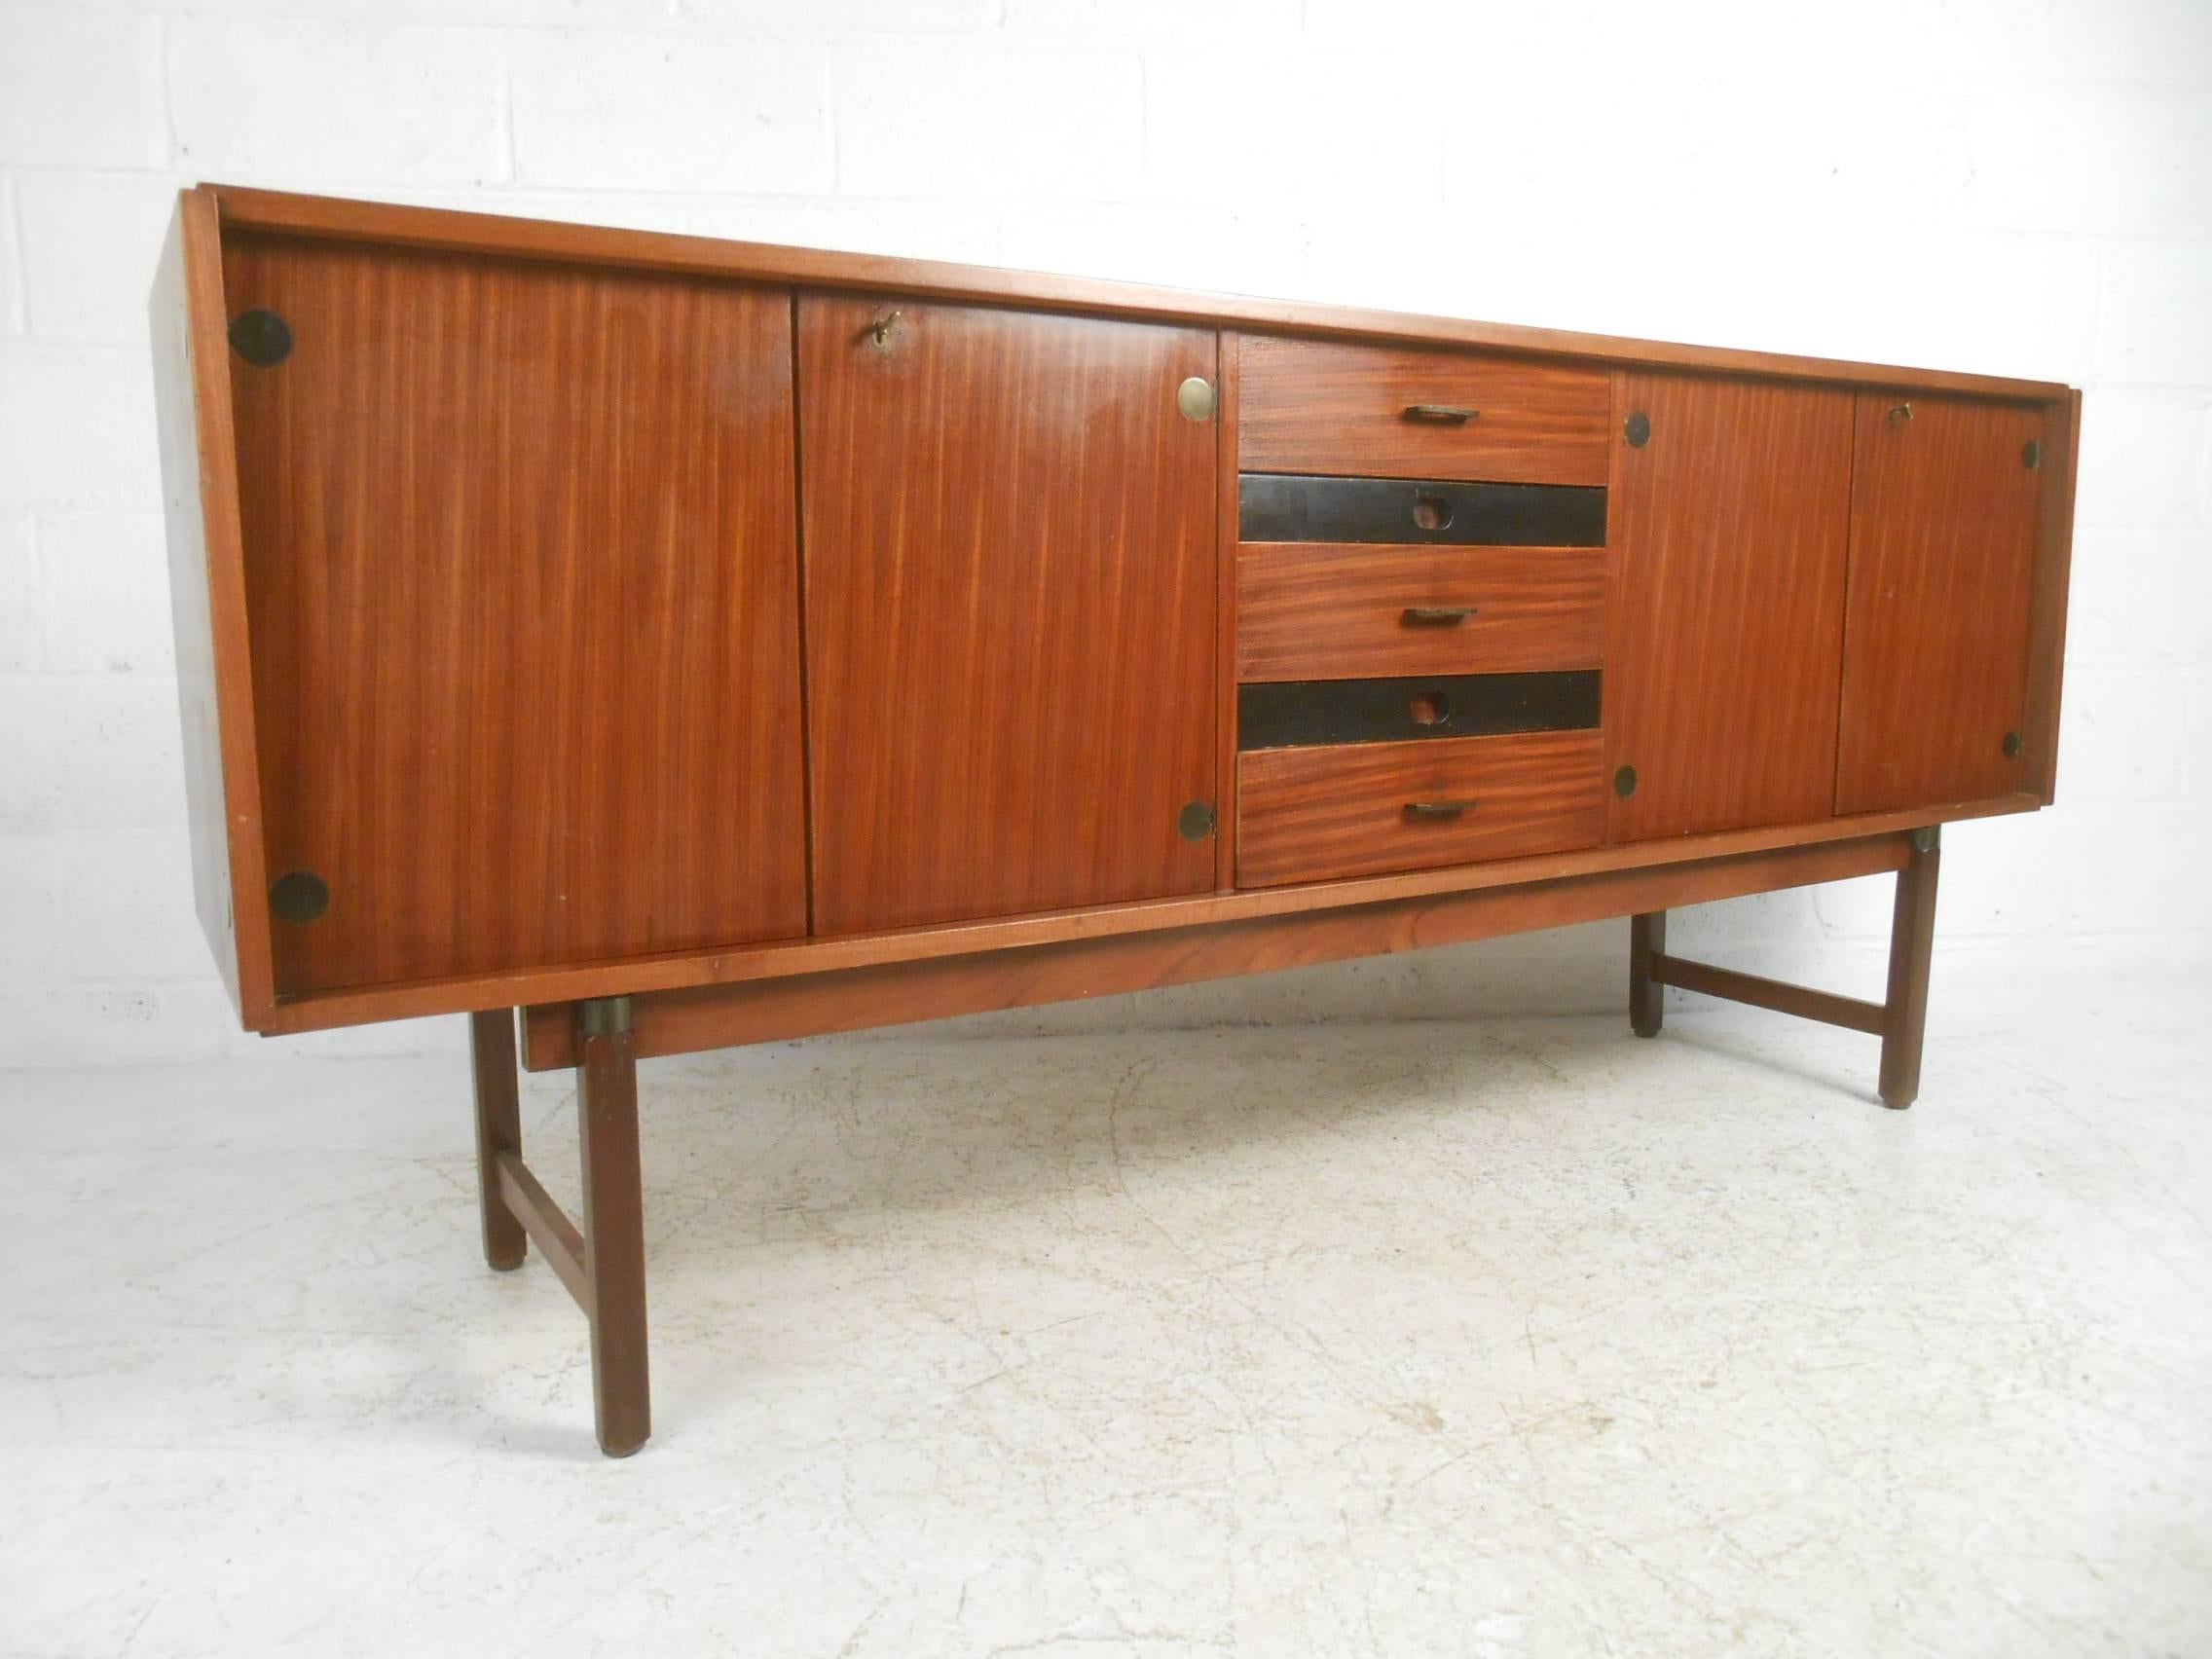 This beautiful vintage modern Italian credenza features five drawers and two separate compartments with shelves for storage. Sleek two-tone design with teak and black drawer fronts showing true quality craftsmanship. Various unusual pulls on each